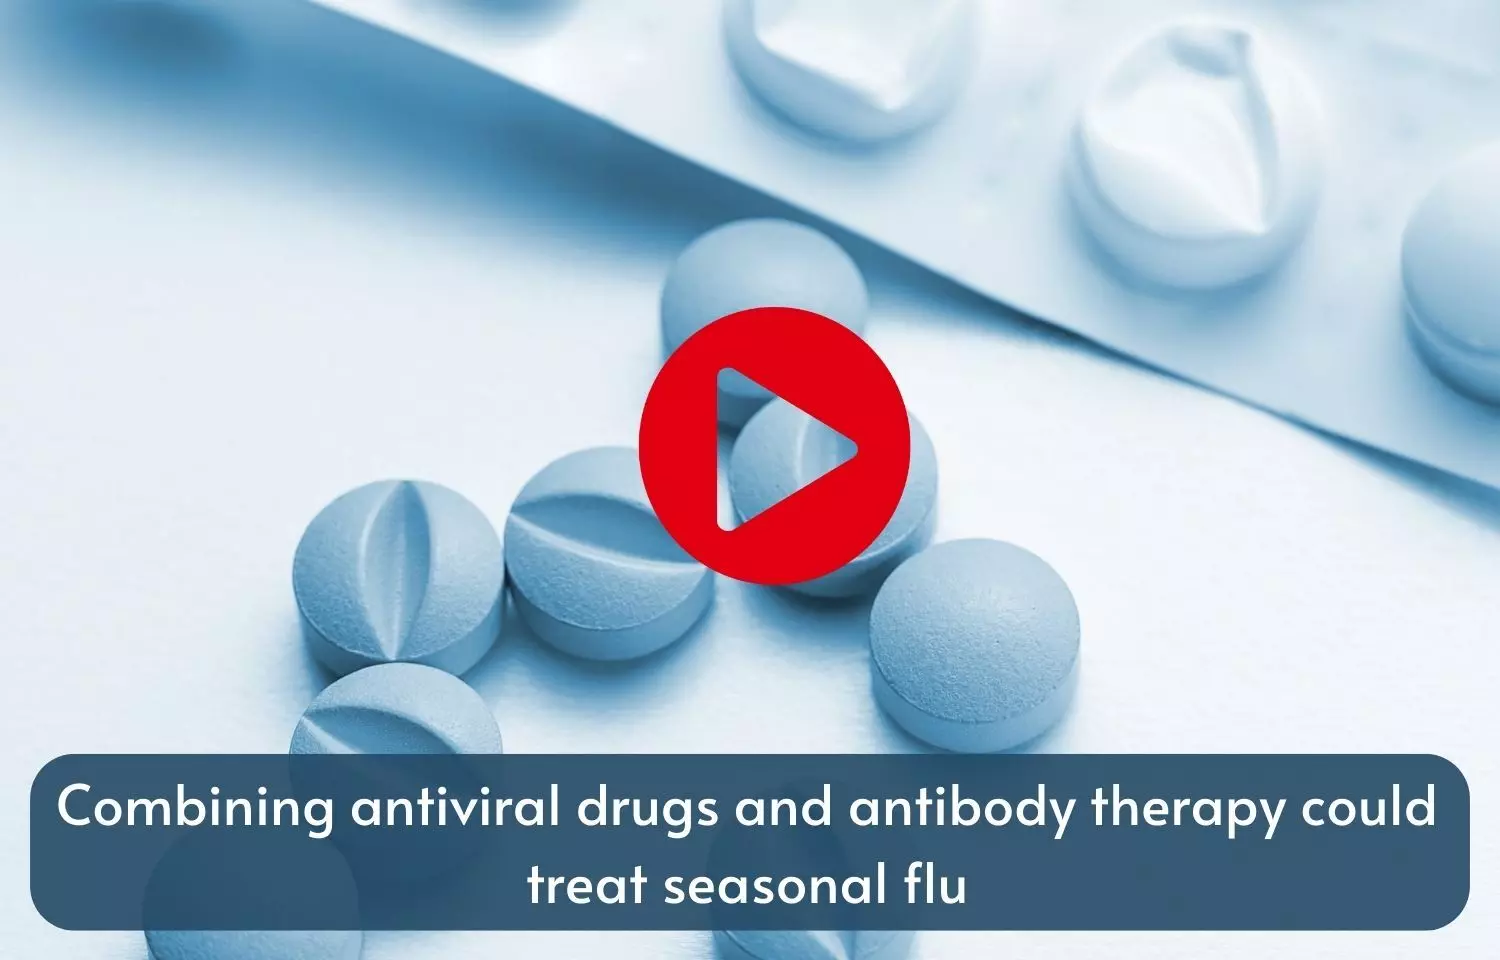 Combining antiviral drugs and antibody therapy could treat seasonal flu